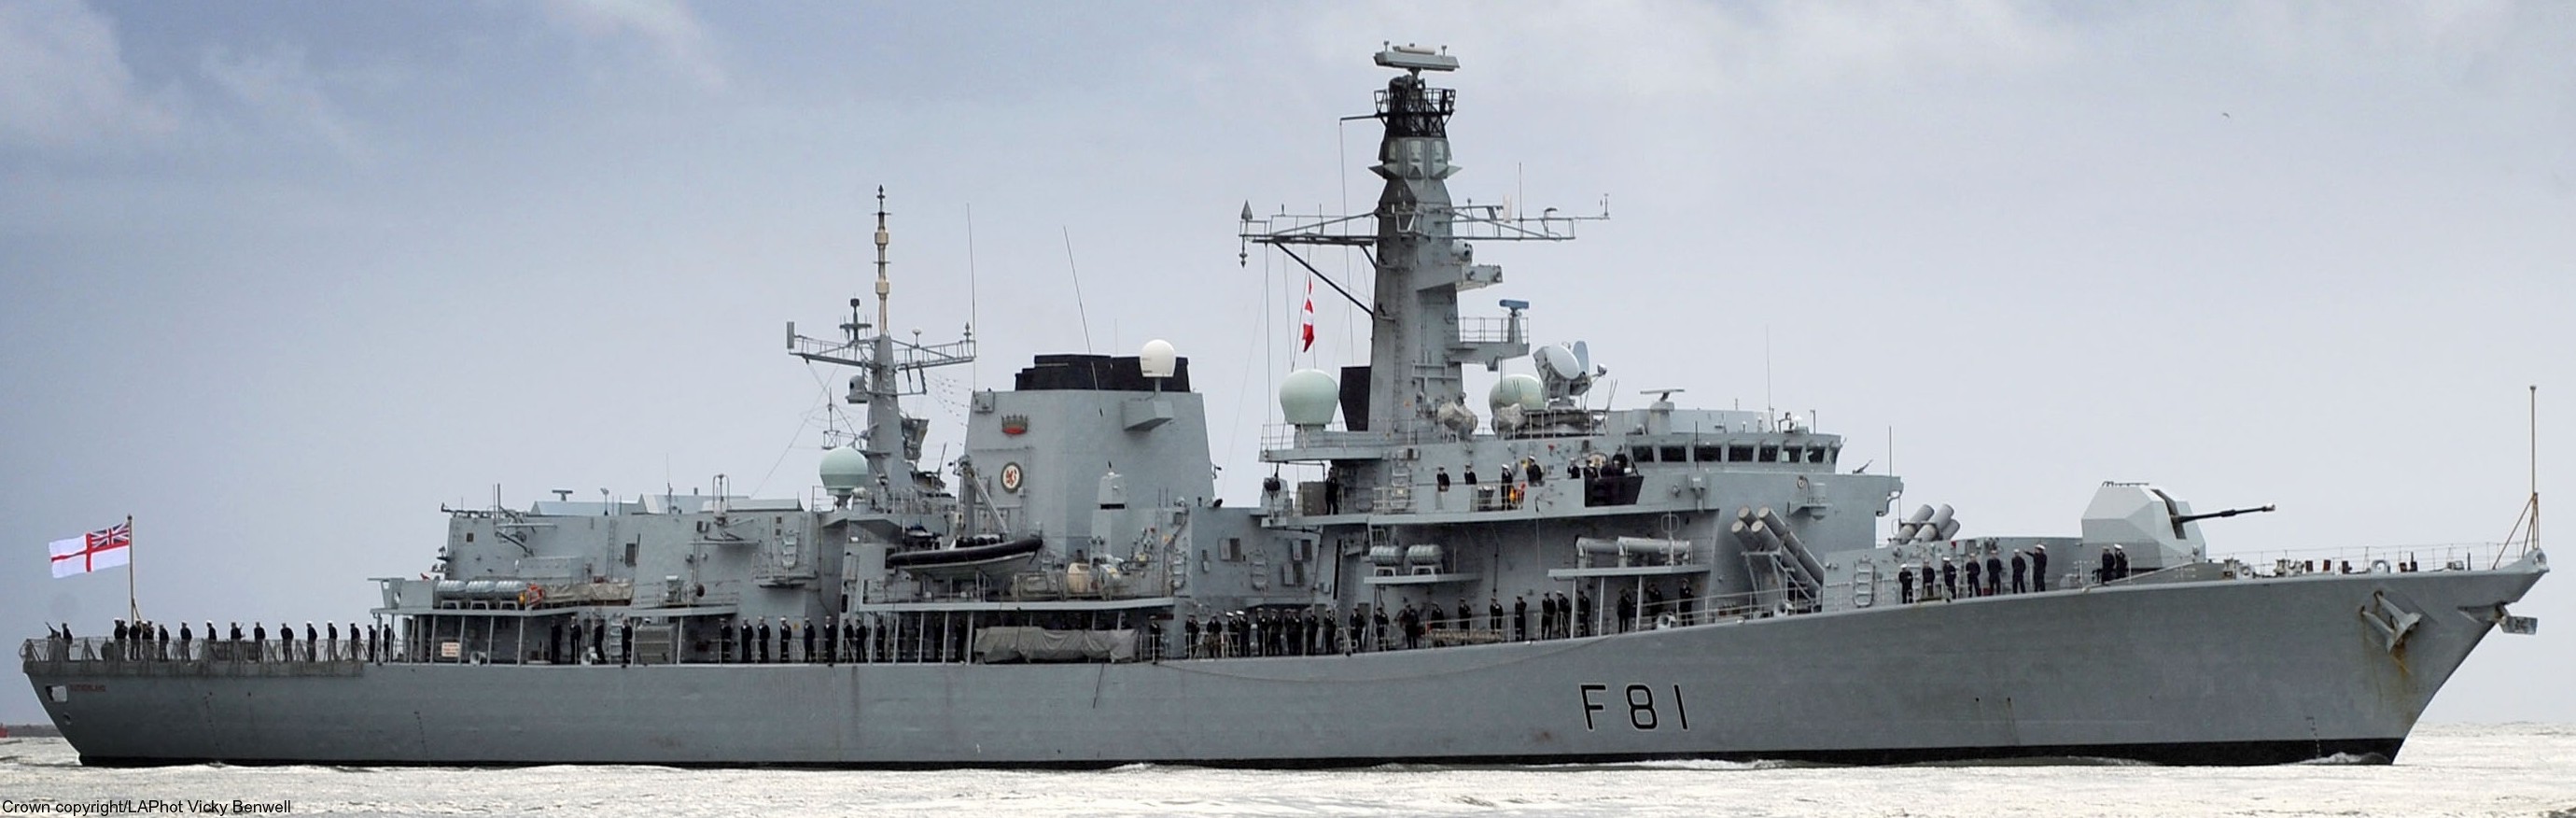 f-81 hms sutherland type 23 duke class guided missile frigate ffg royal navy 02